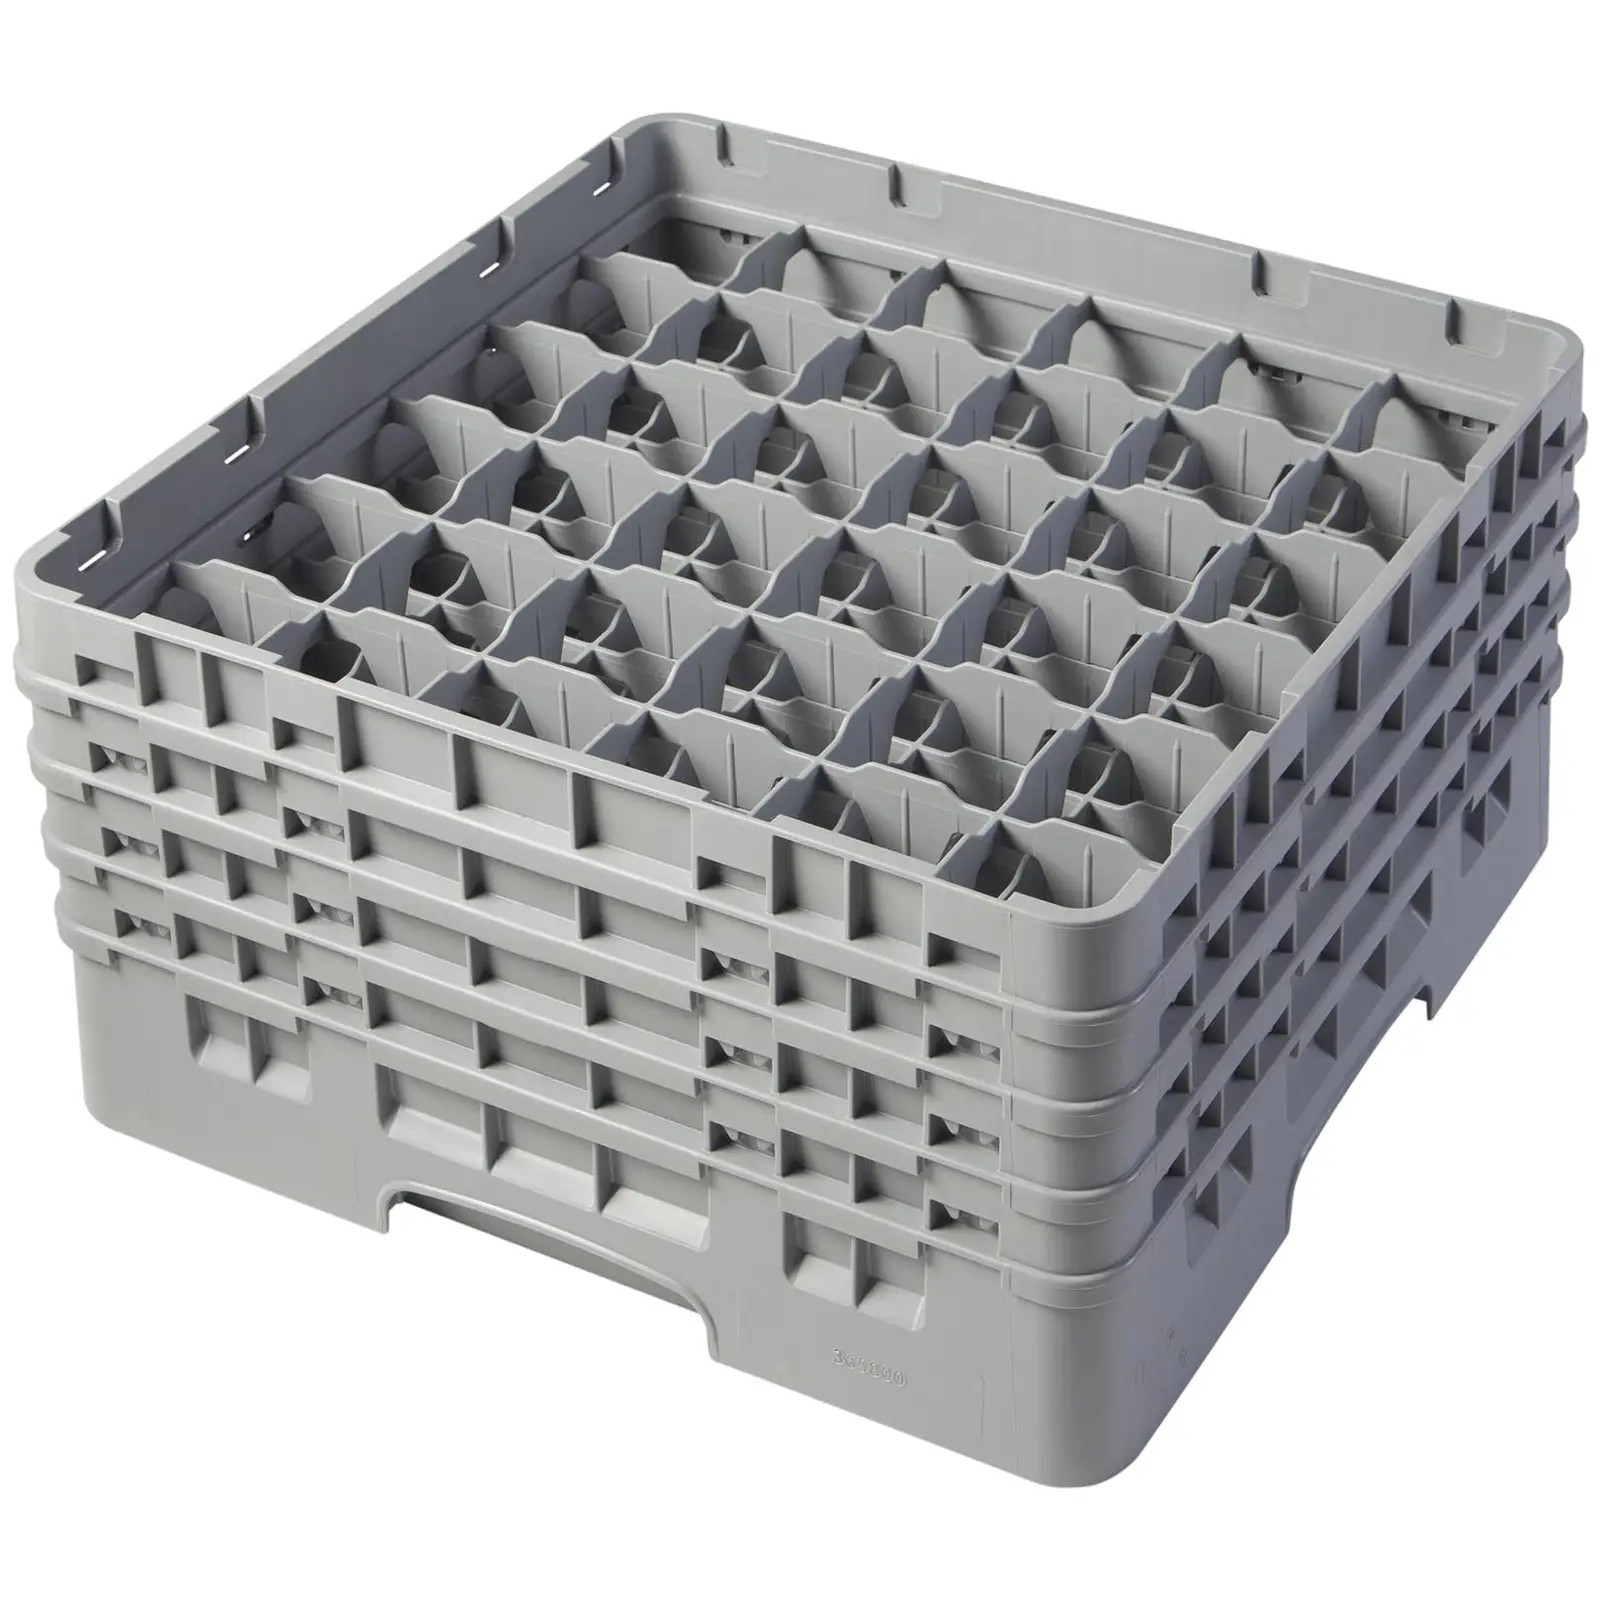 CAMBRO Camrack - {{number_of_compartments_925}} Compartimenten - 50 x 50 x 26,7 cm - Glashoogte: 21,5 cm